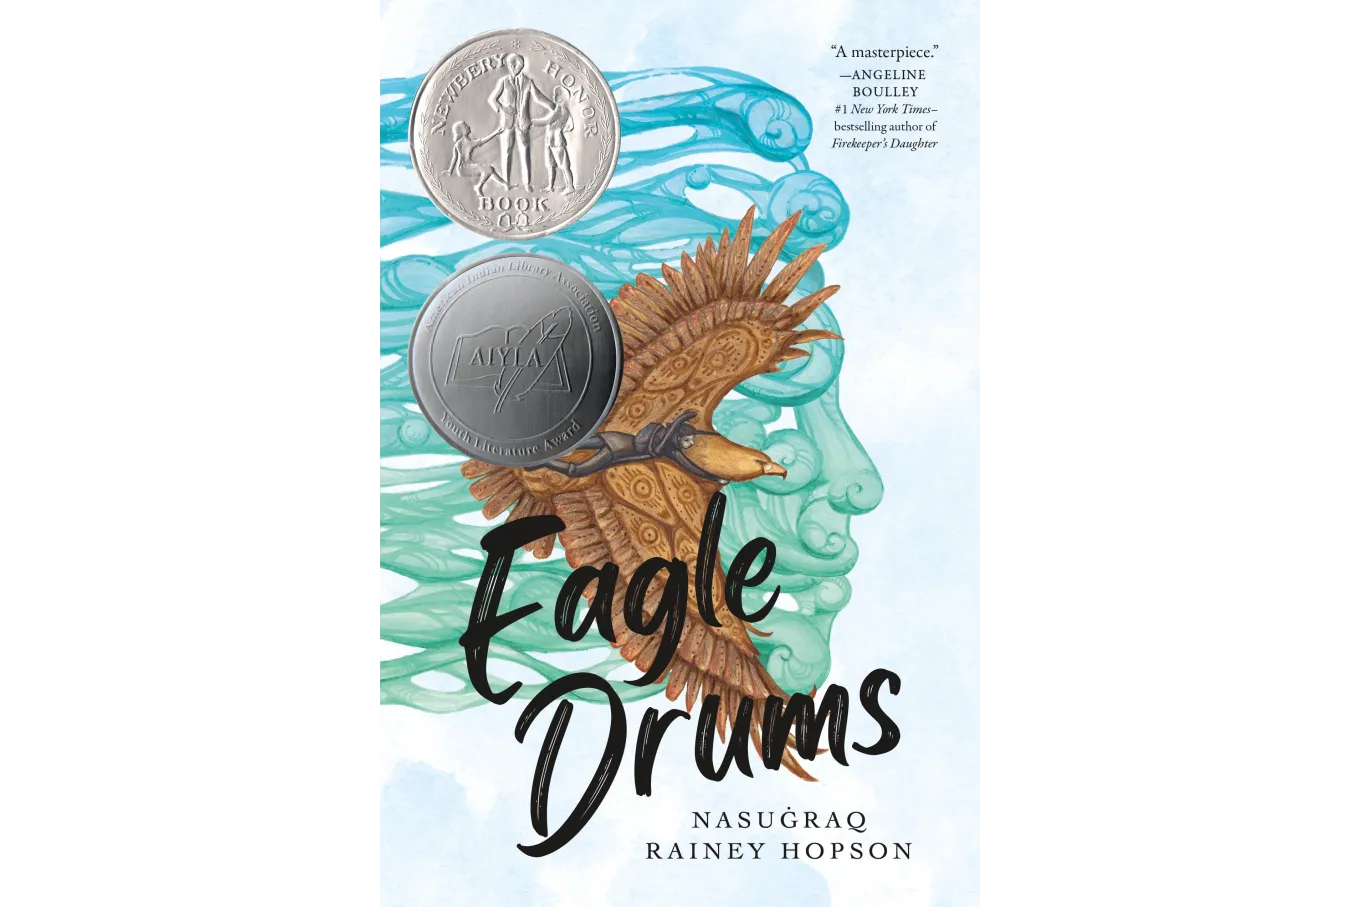 Cover of Eagle Drums